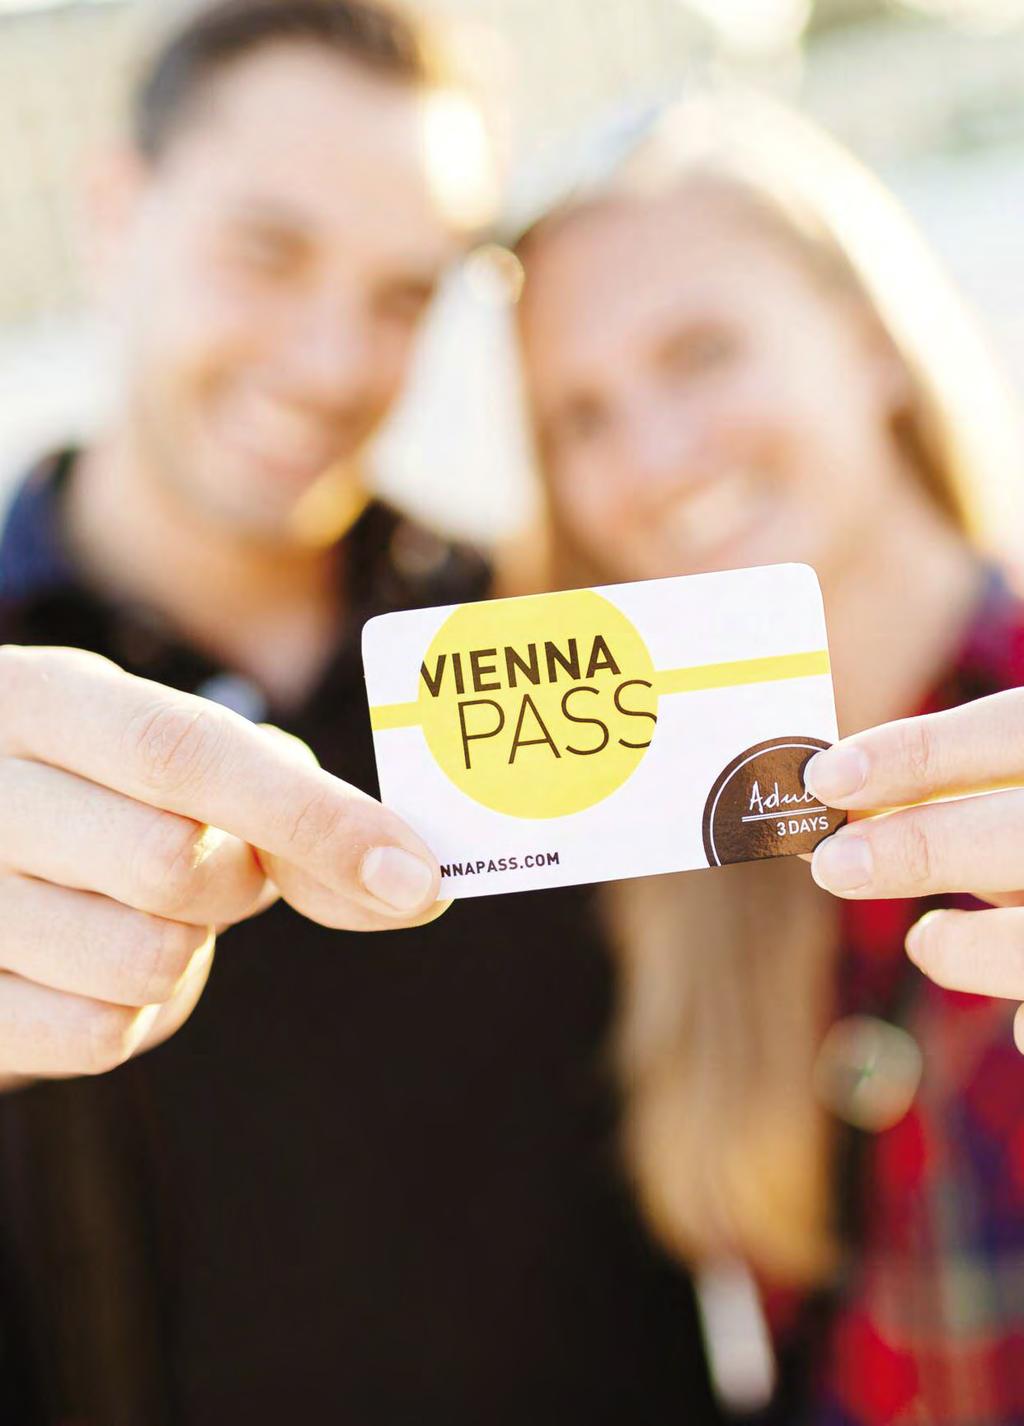 Vienna PASS Vienna PASS Vienna Attractions - Free Entry with the Vienna PASS Discover Vienna s imperial palaces, cultural art galleries and fascinating museums, all included in the Vienna PASS.